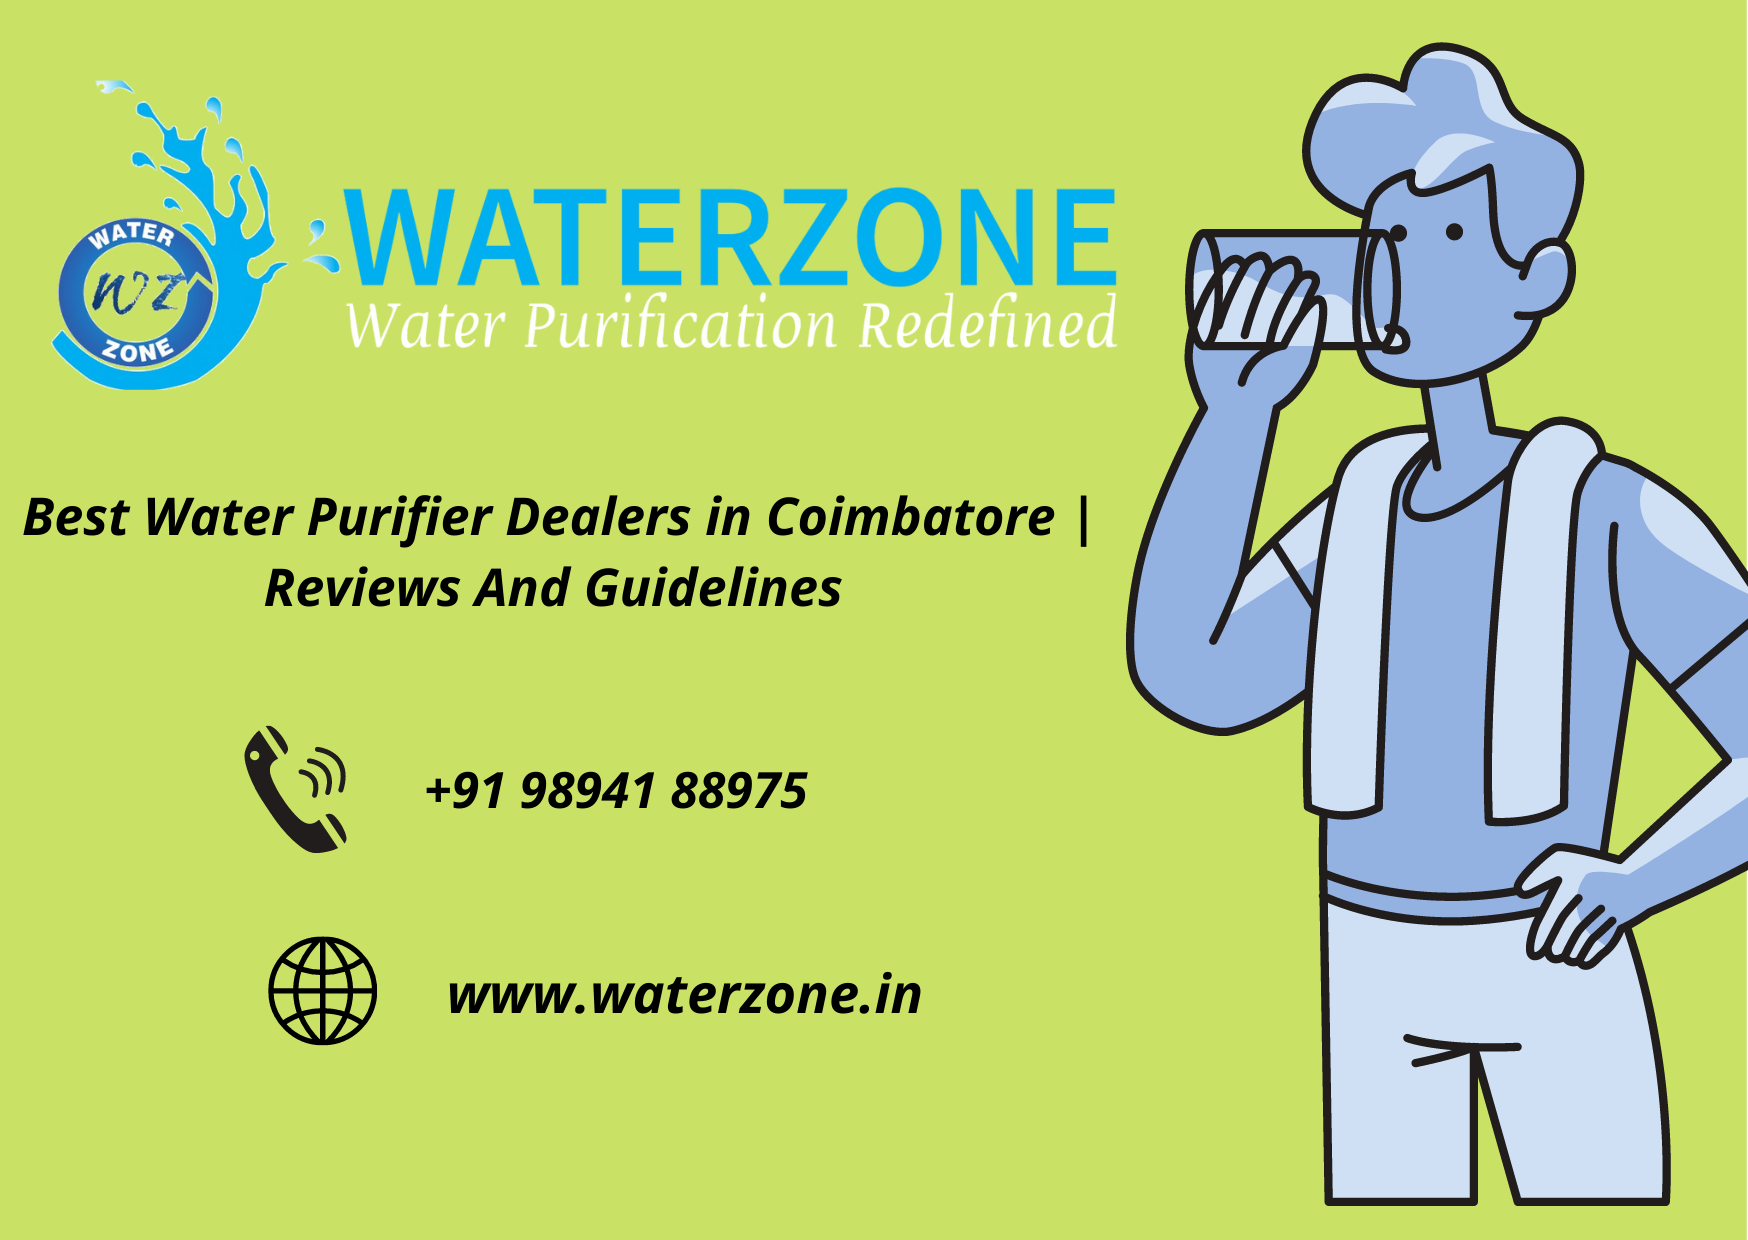 Best Water Purifier Dealers in Coimbatore | Reviews and Guidelines